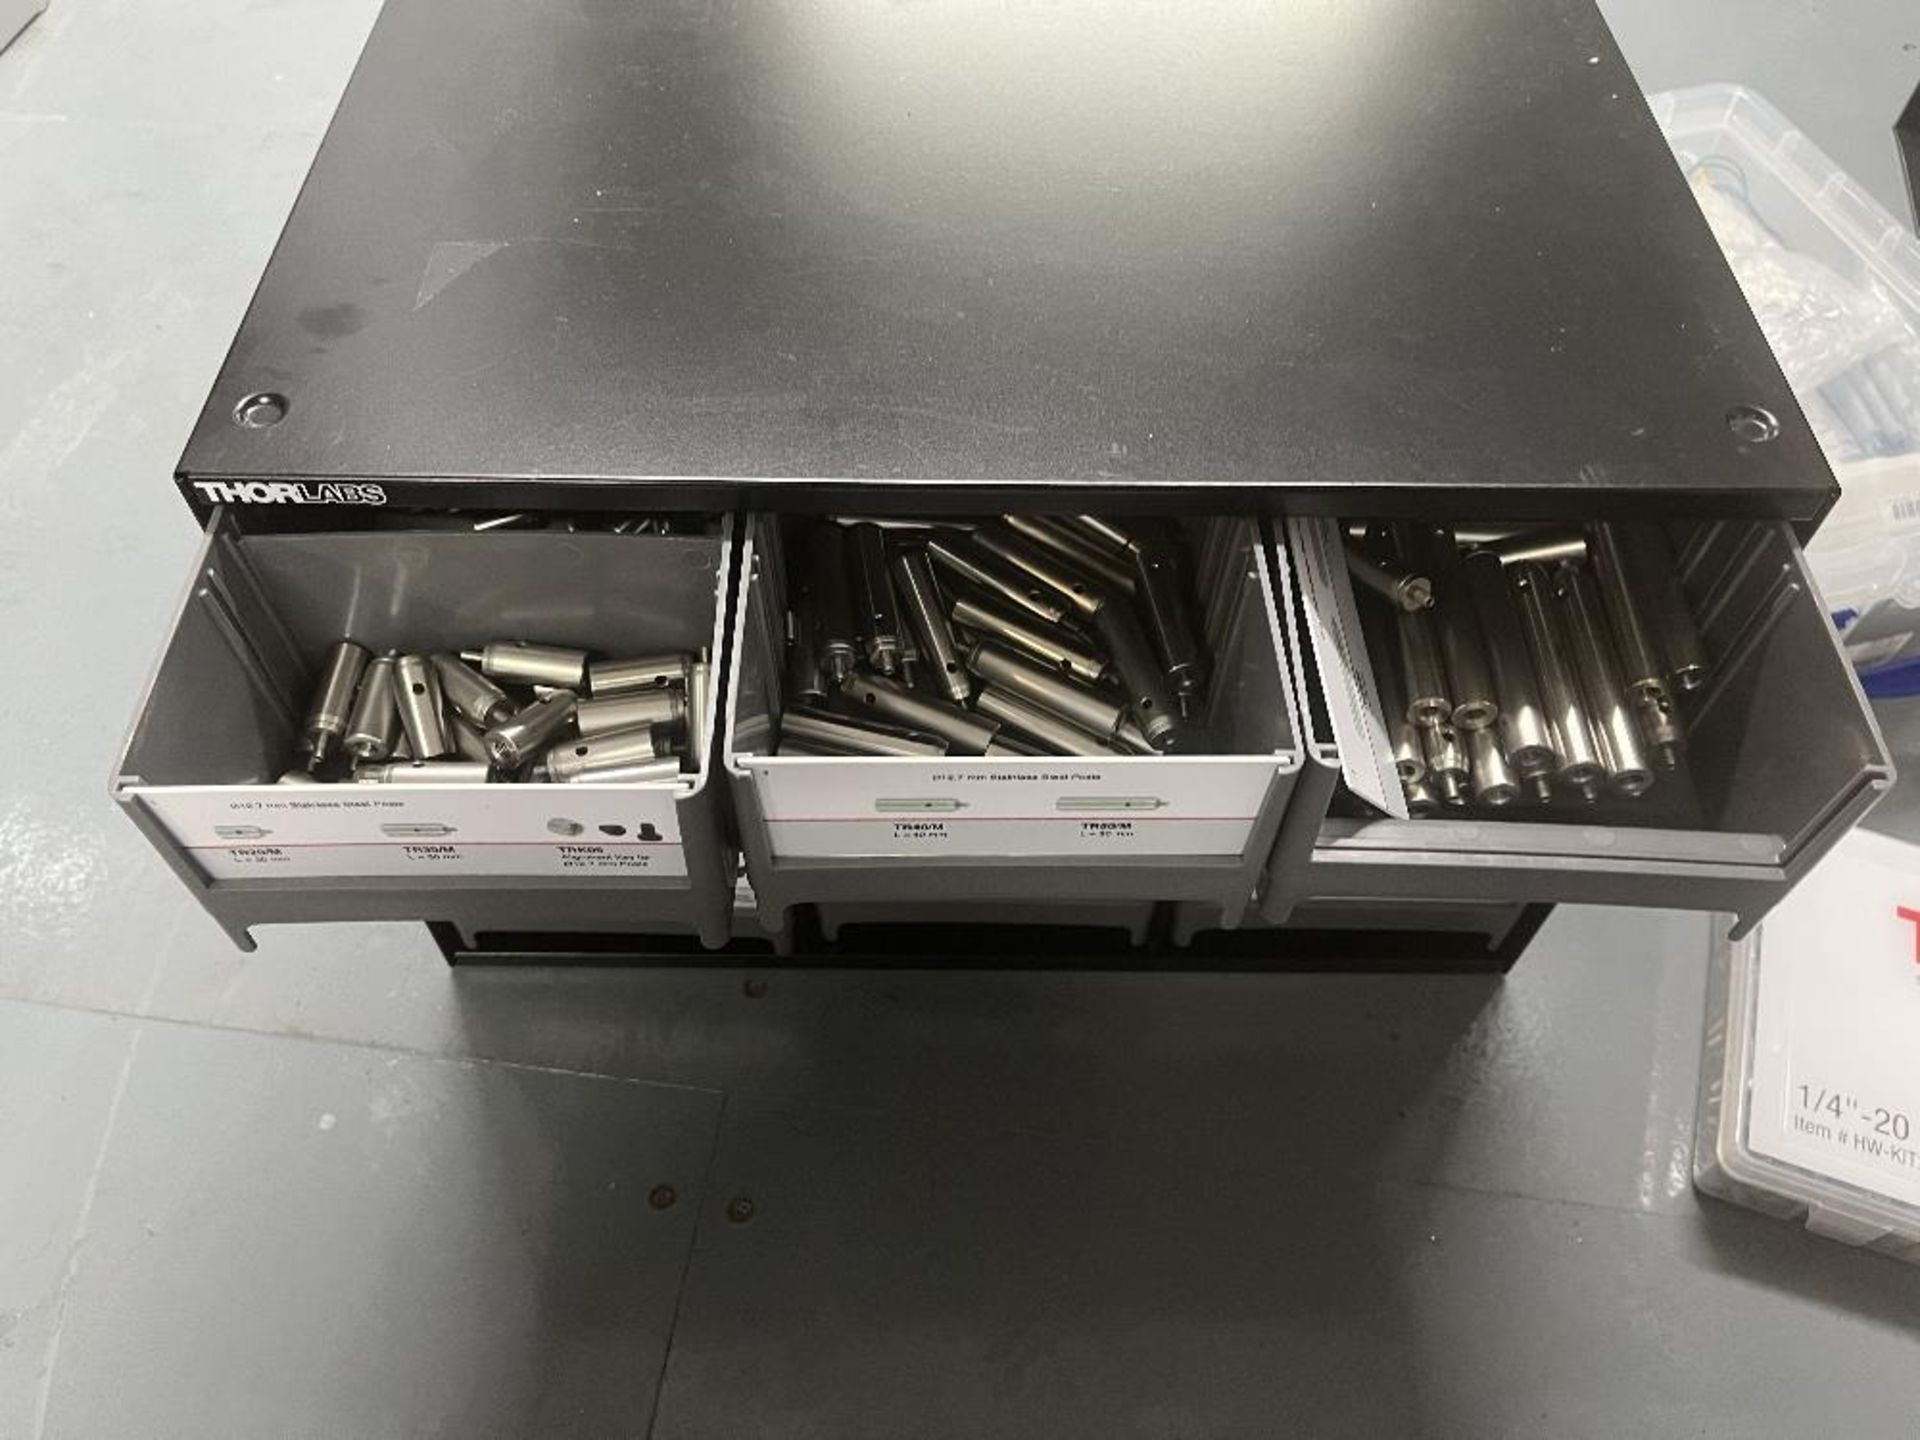 Large Quantity of Various Thorlabs Optical & Mechanical Components - Image 17 of 32